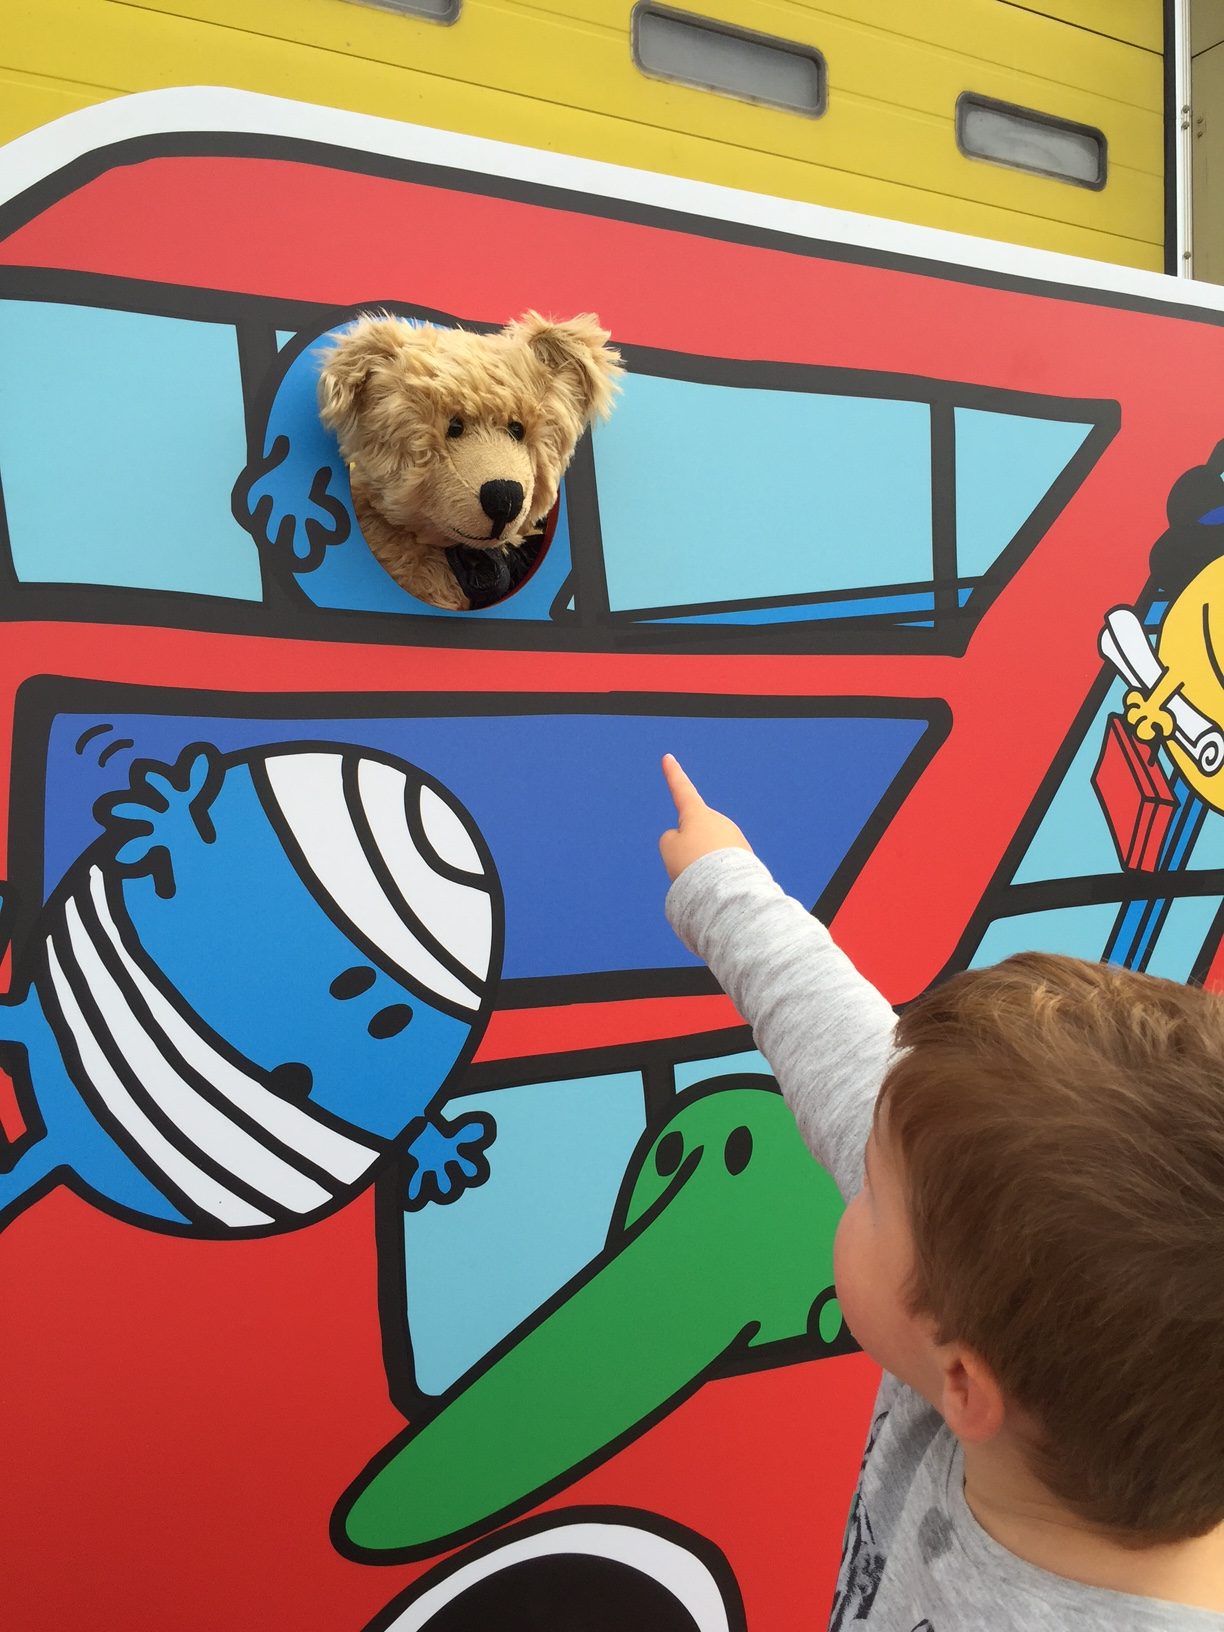 London Transport Museum: “Mummy… there’s a bear up there!’